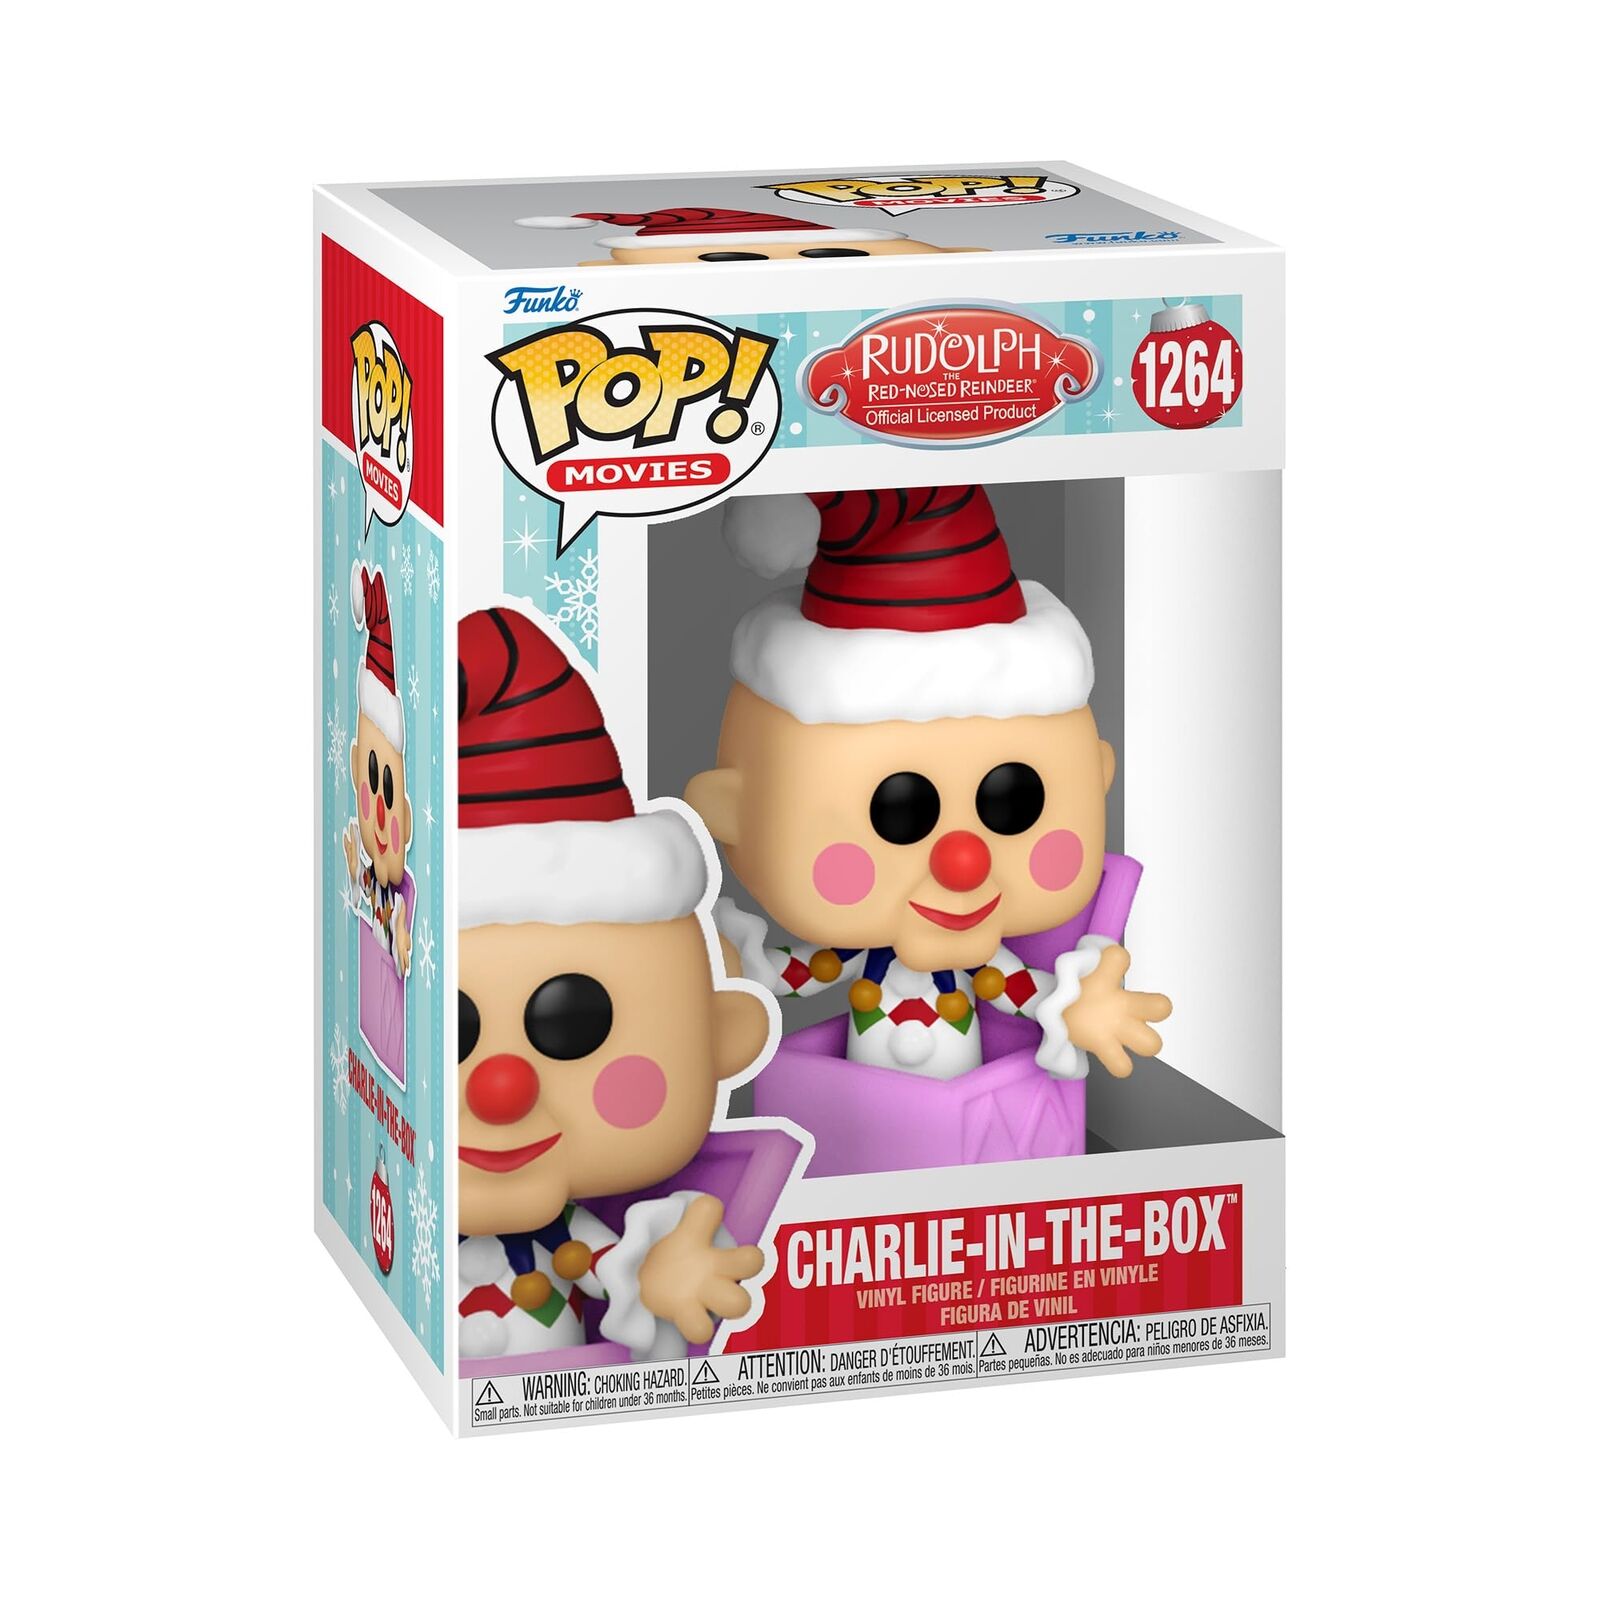 Funko POP Movies: Rudolph - Misfit Elephant - Charlie In the Box - Rudolph the 